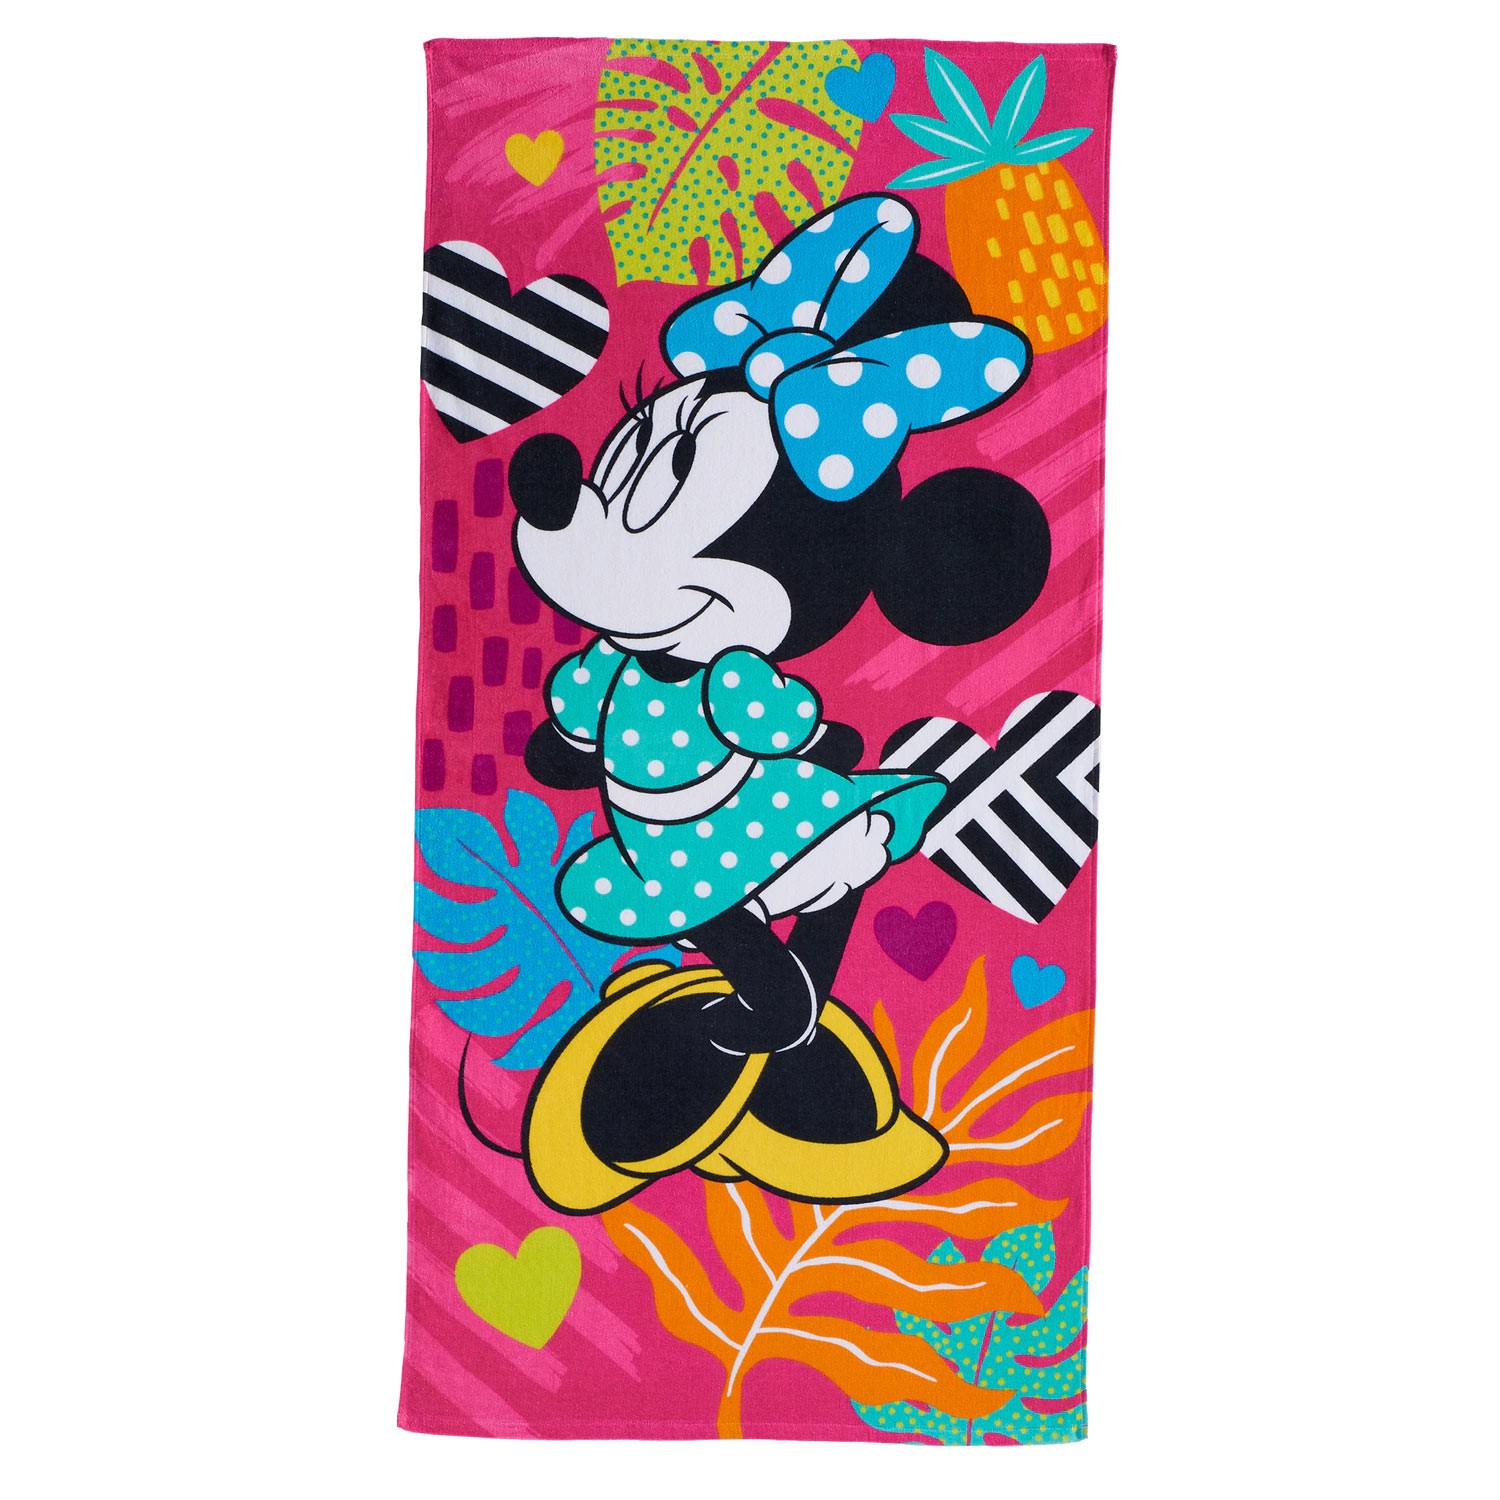 Disney Minnie Mouse beach towel towel various designs 70x140 cm pink with flowers 100% cotton for kids boys and girls 